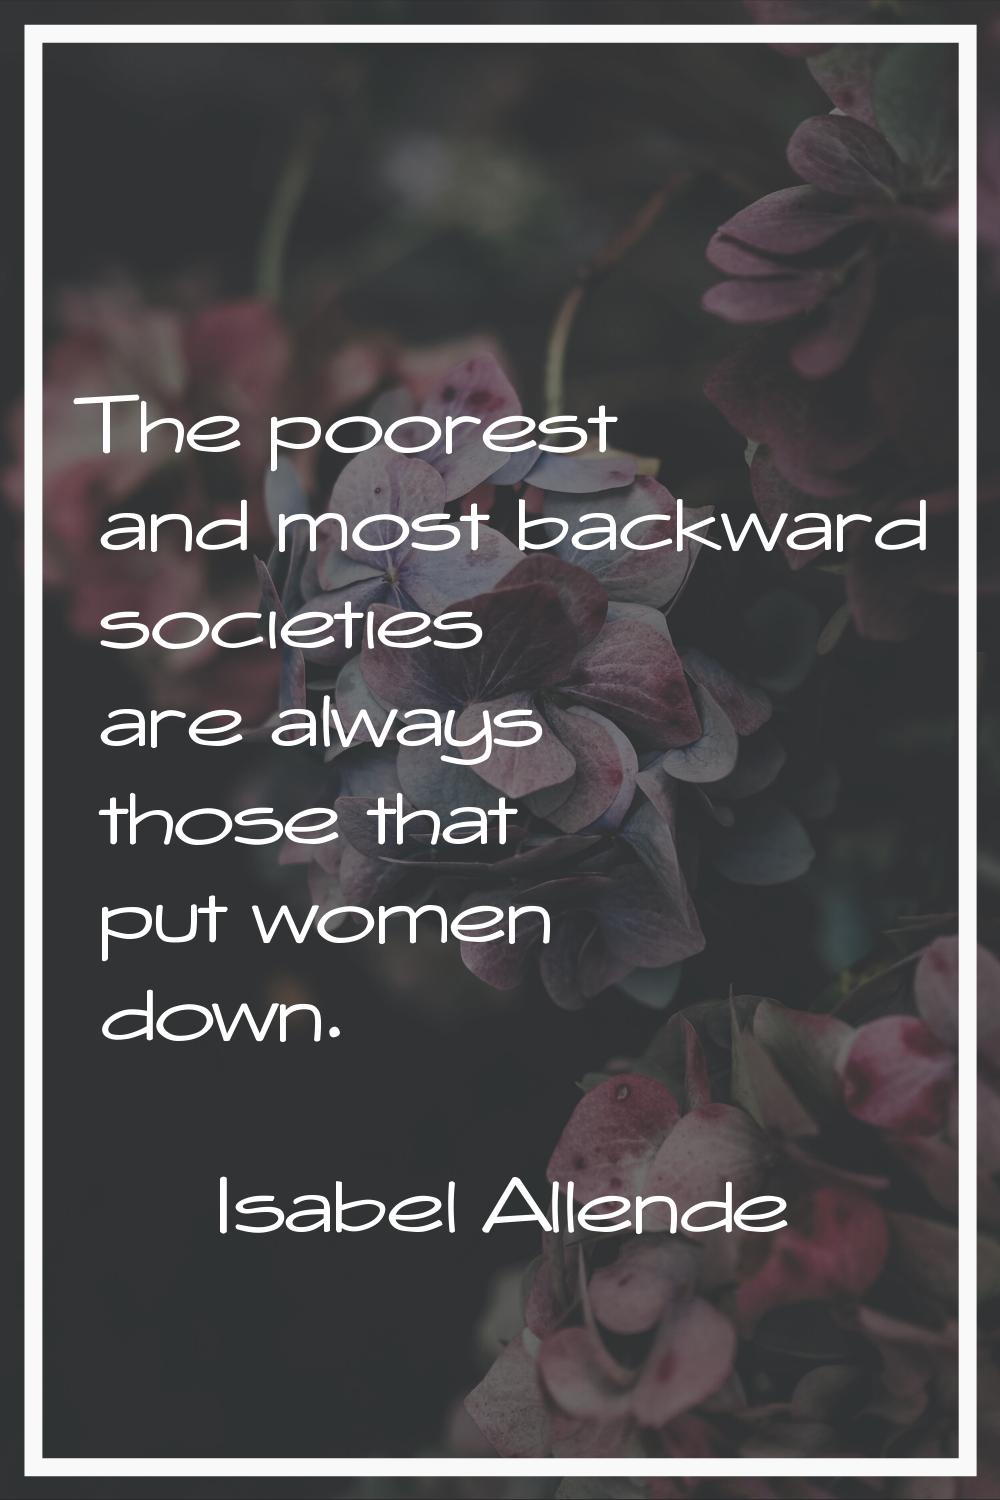 The poorest and most backward societies are always those that put women down.